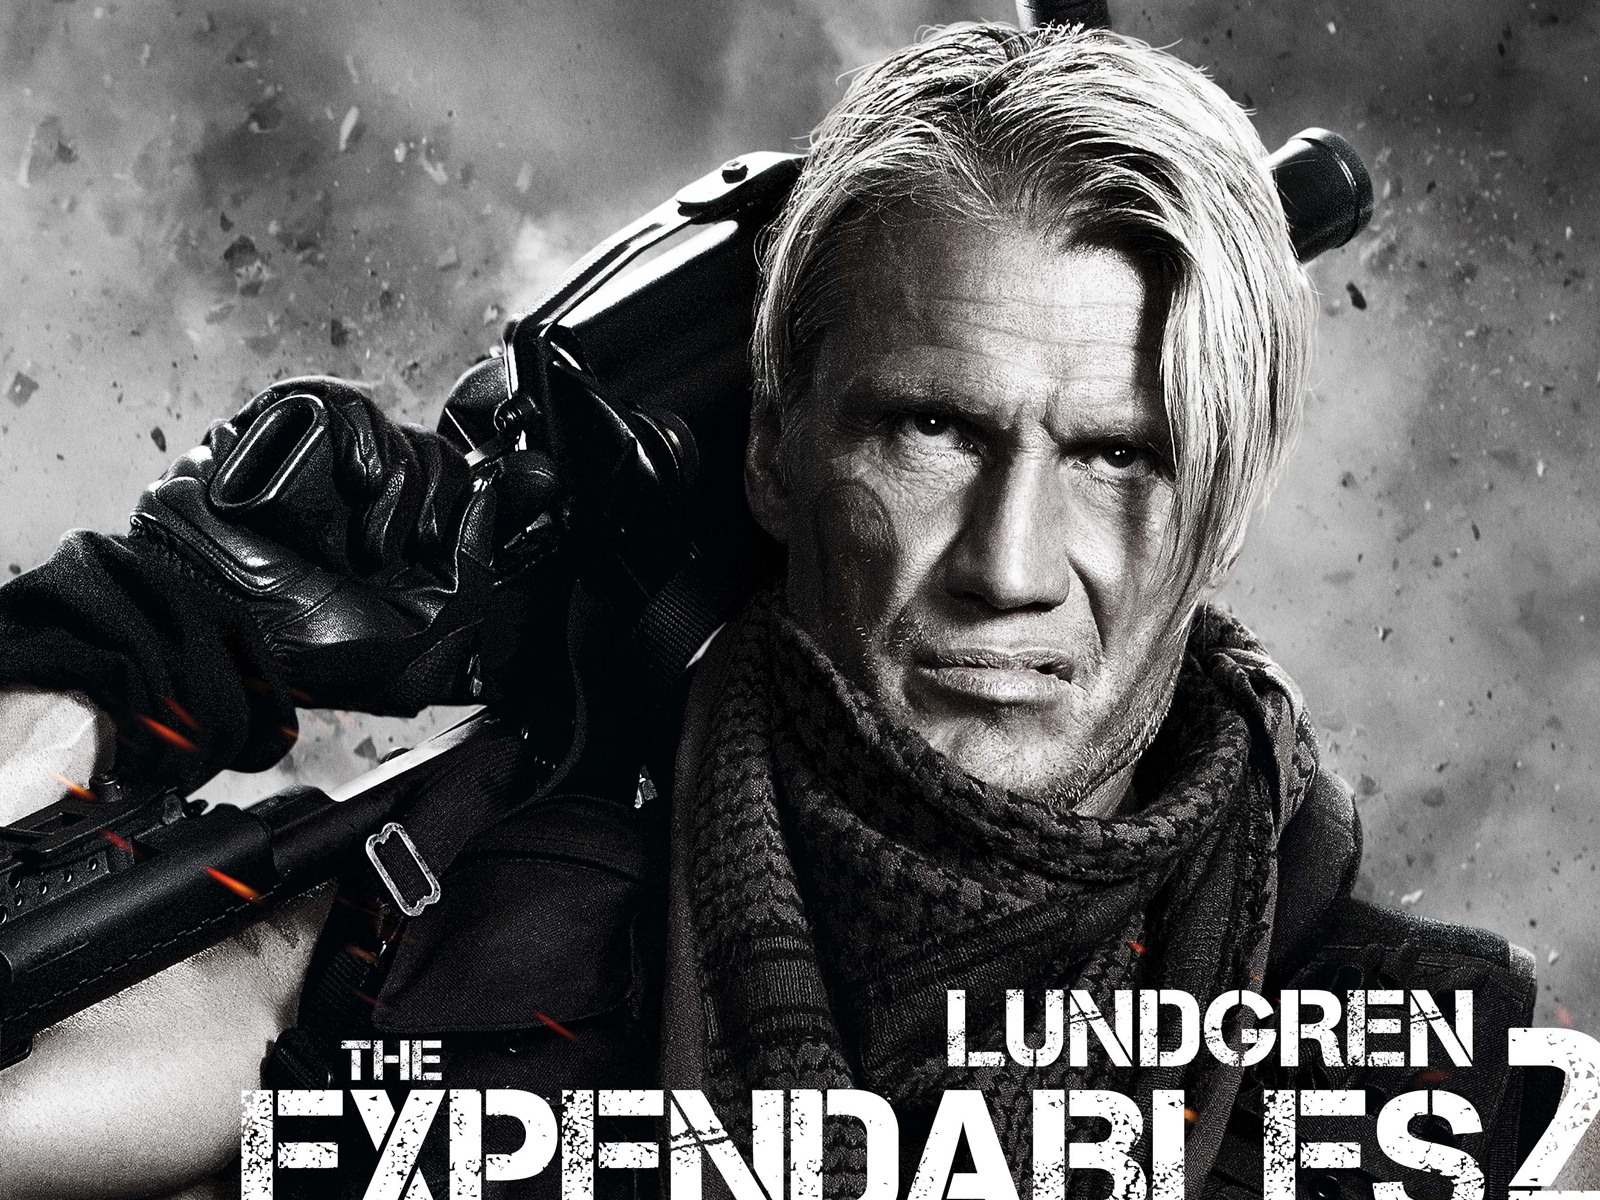 2012 Expendables2 HDの壁紙 #3 - 1600x1200